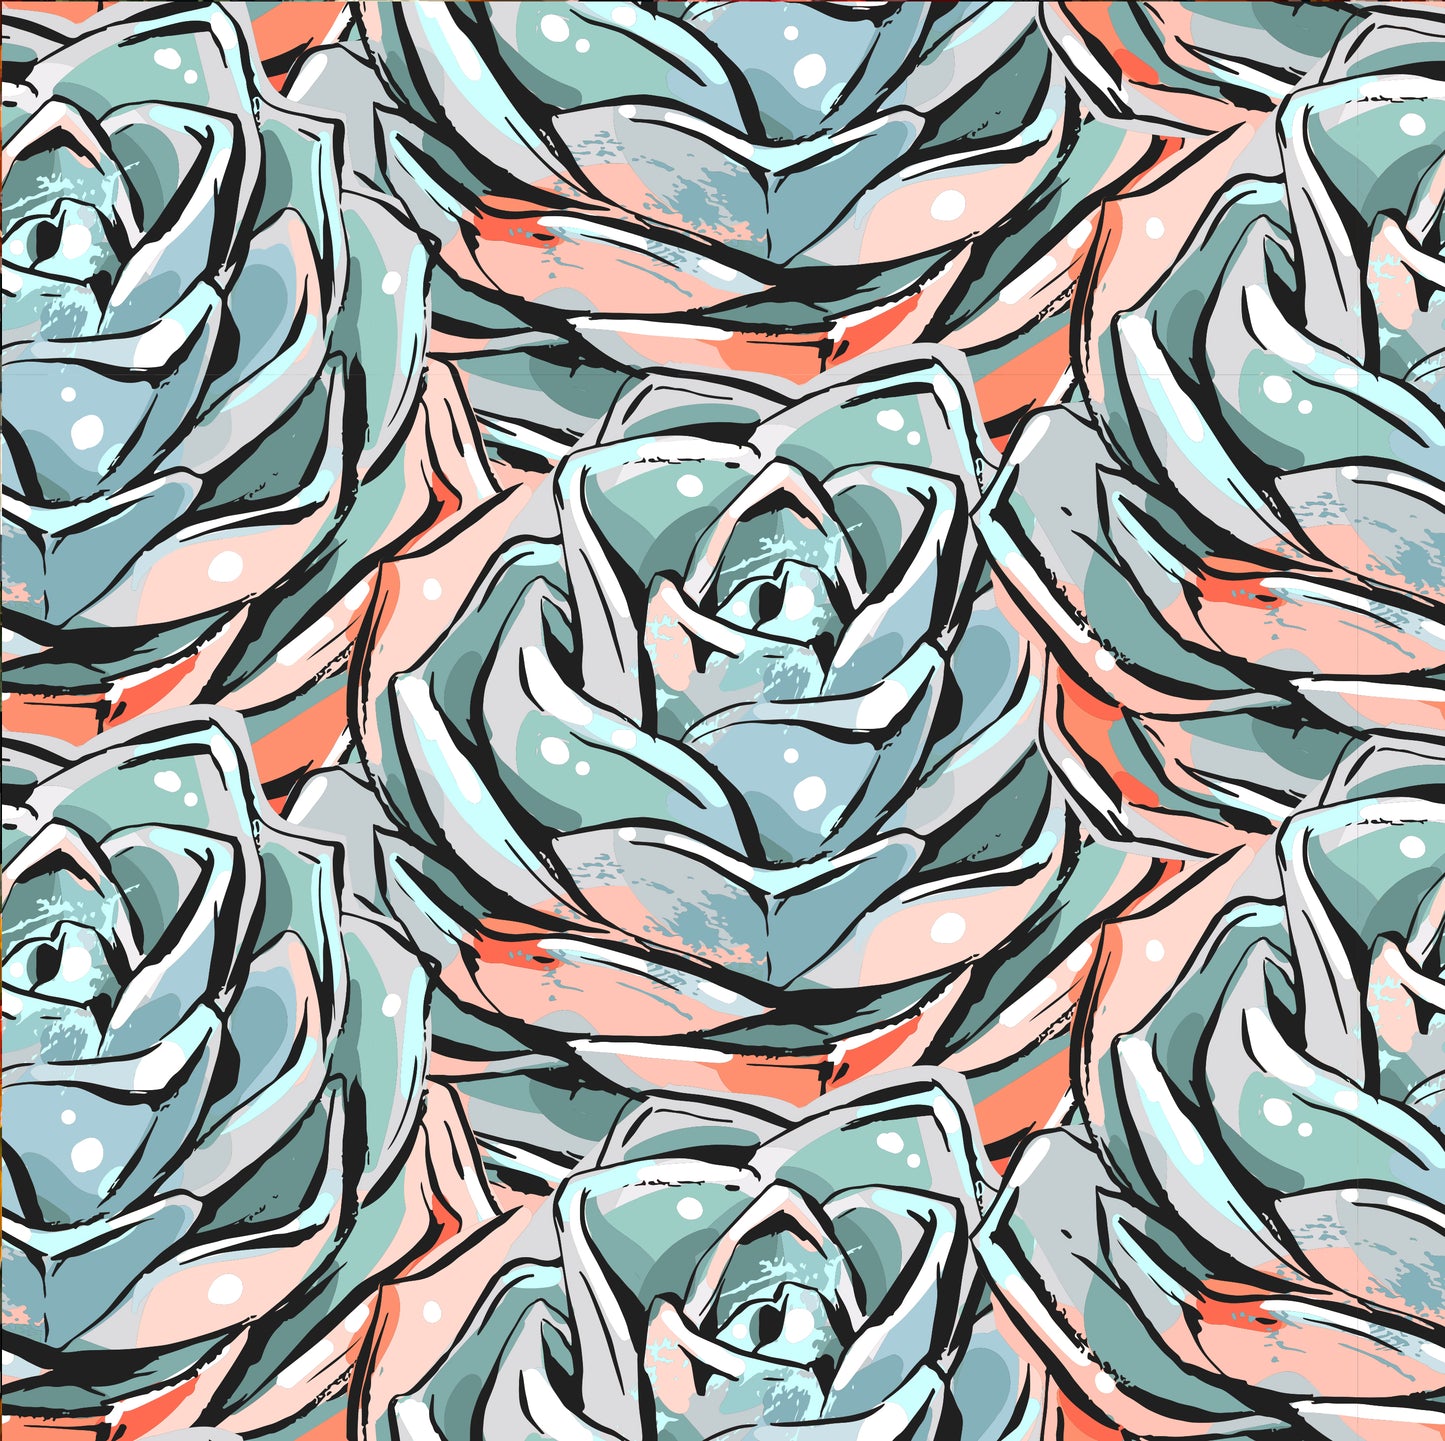 Sweet Succulent Removable Peel And Stick Wallpaper